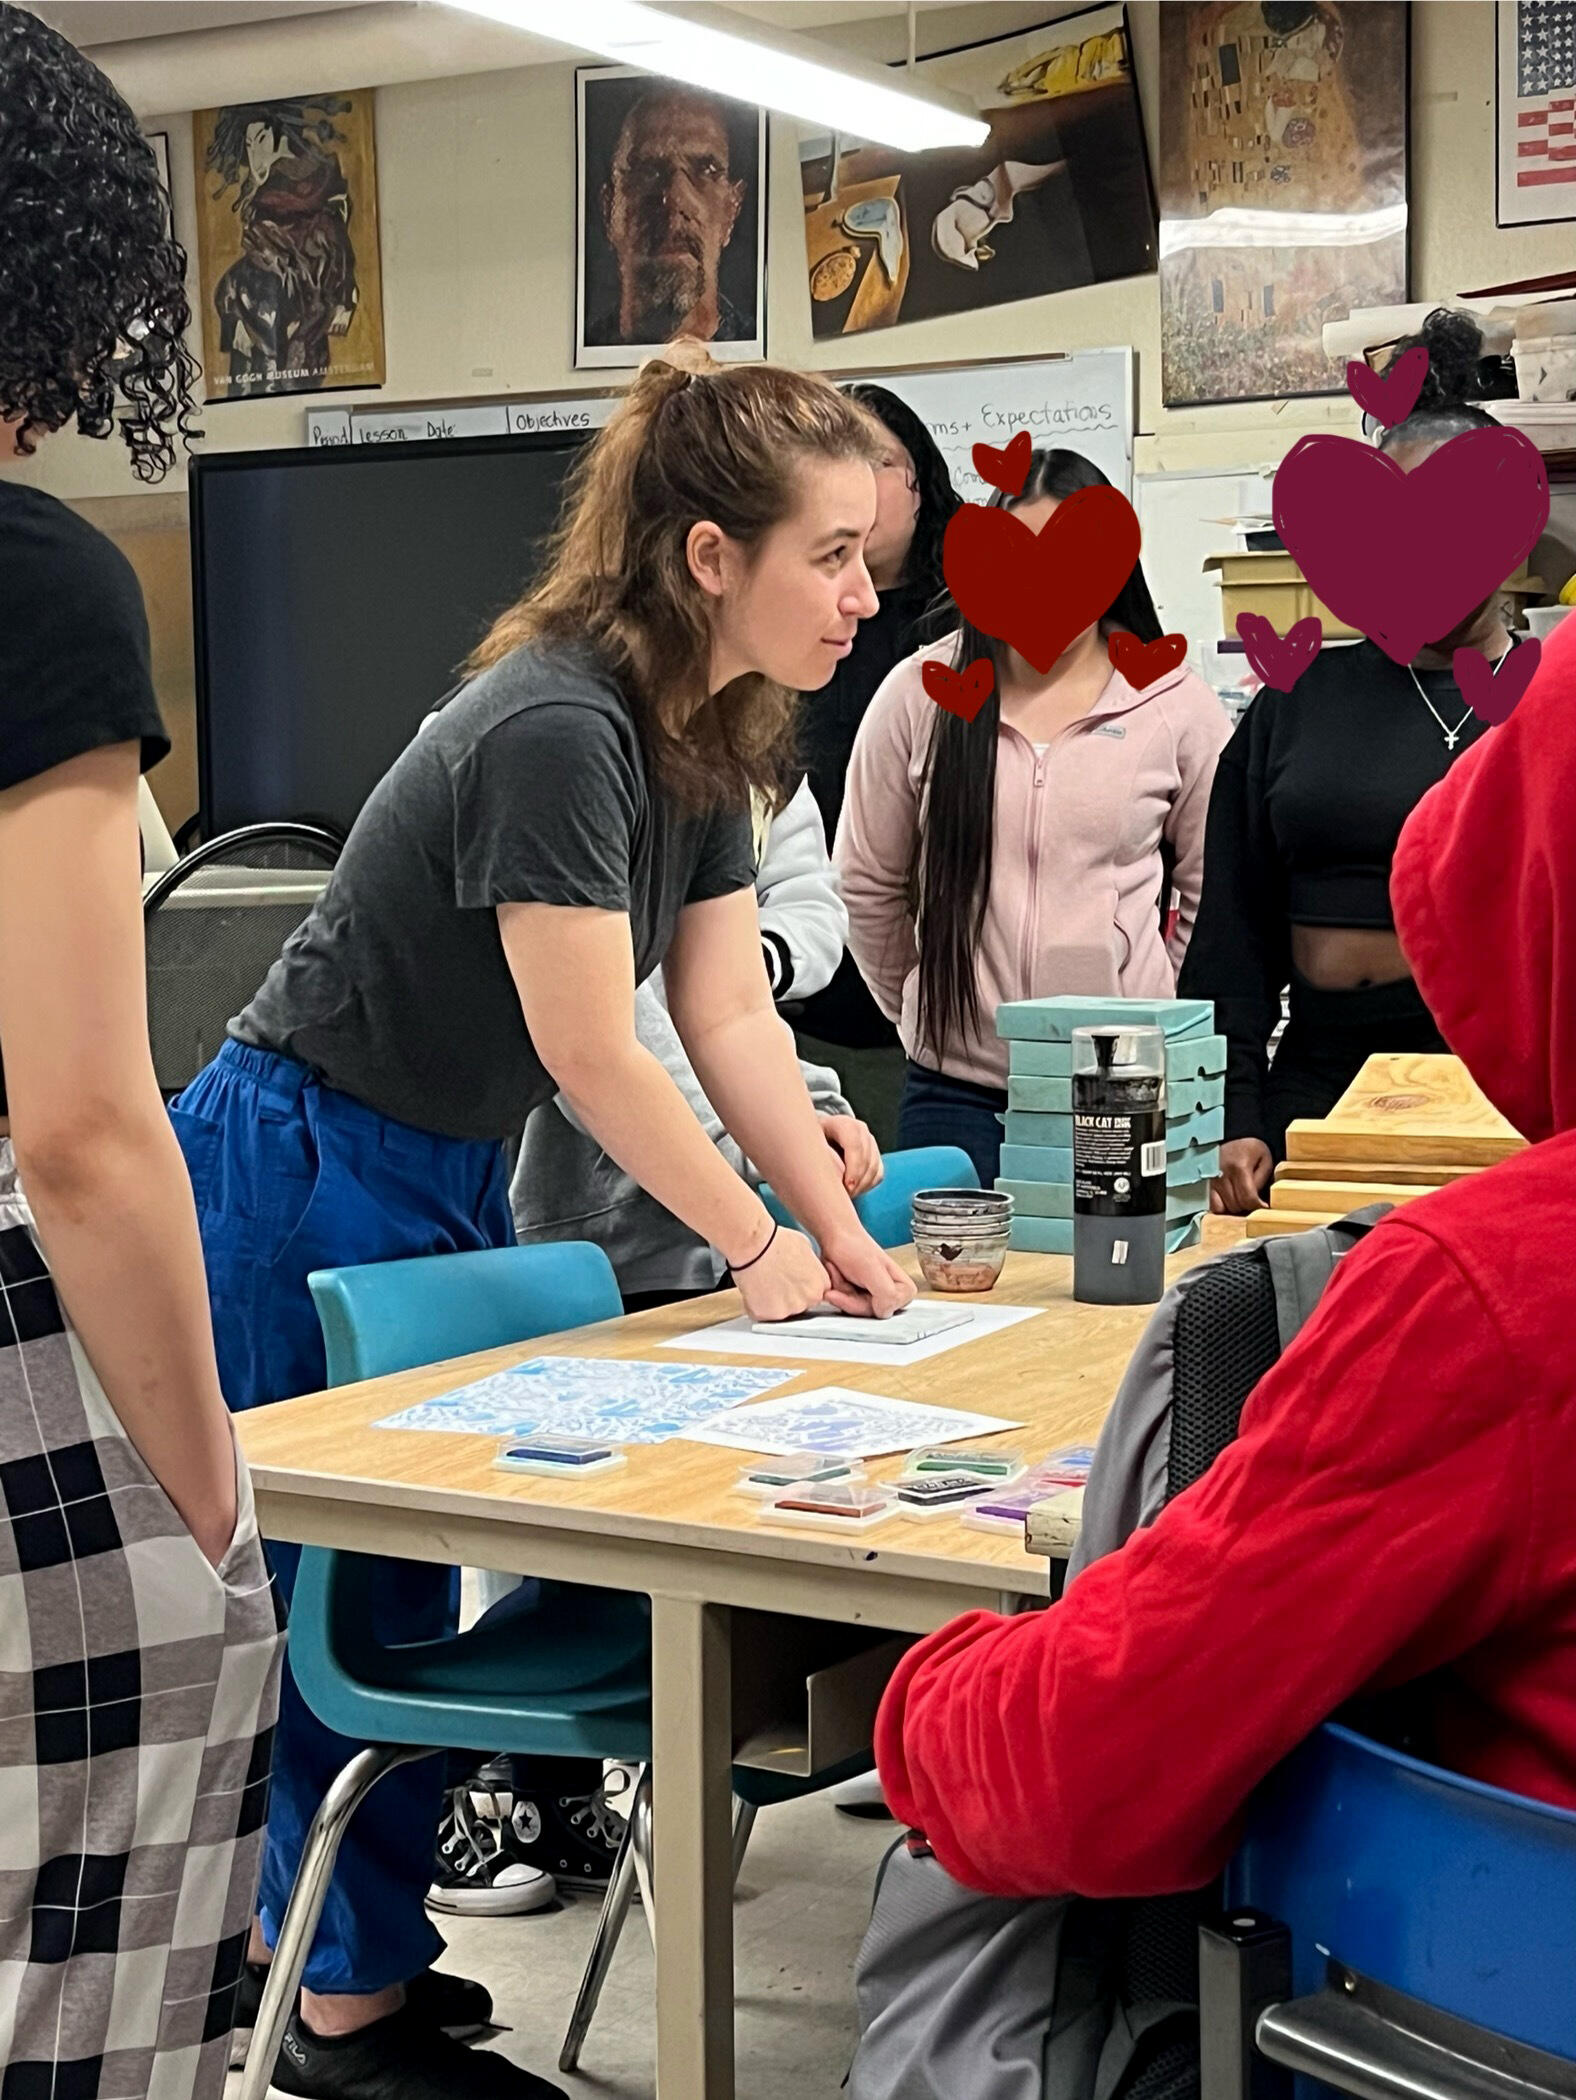 A woman in the center of the image is surrounded by a group of high-schoolers. The woman is pushing down on a sandwich of thin easy-cut linoleum block and a piece of paper onto the table.